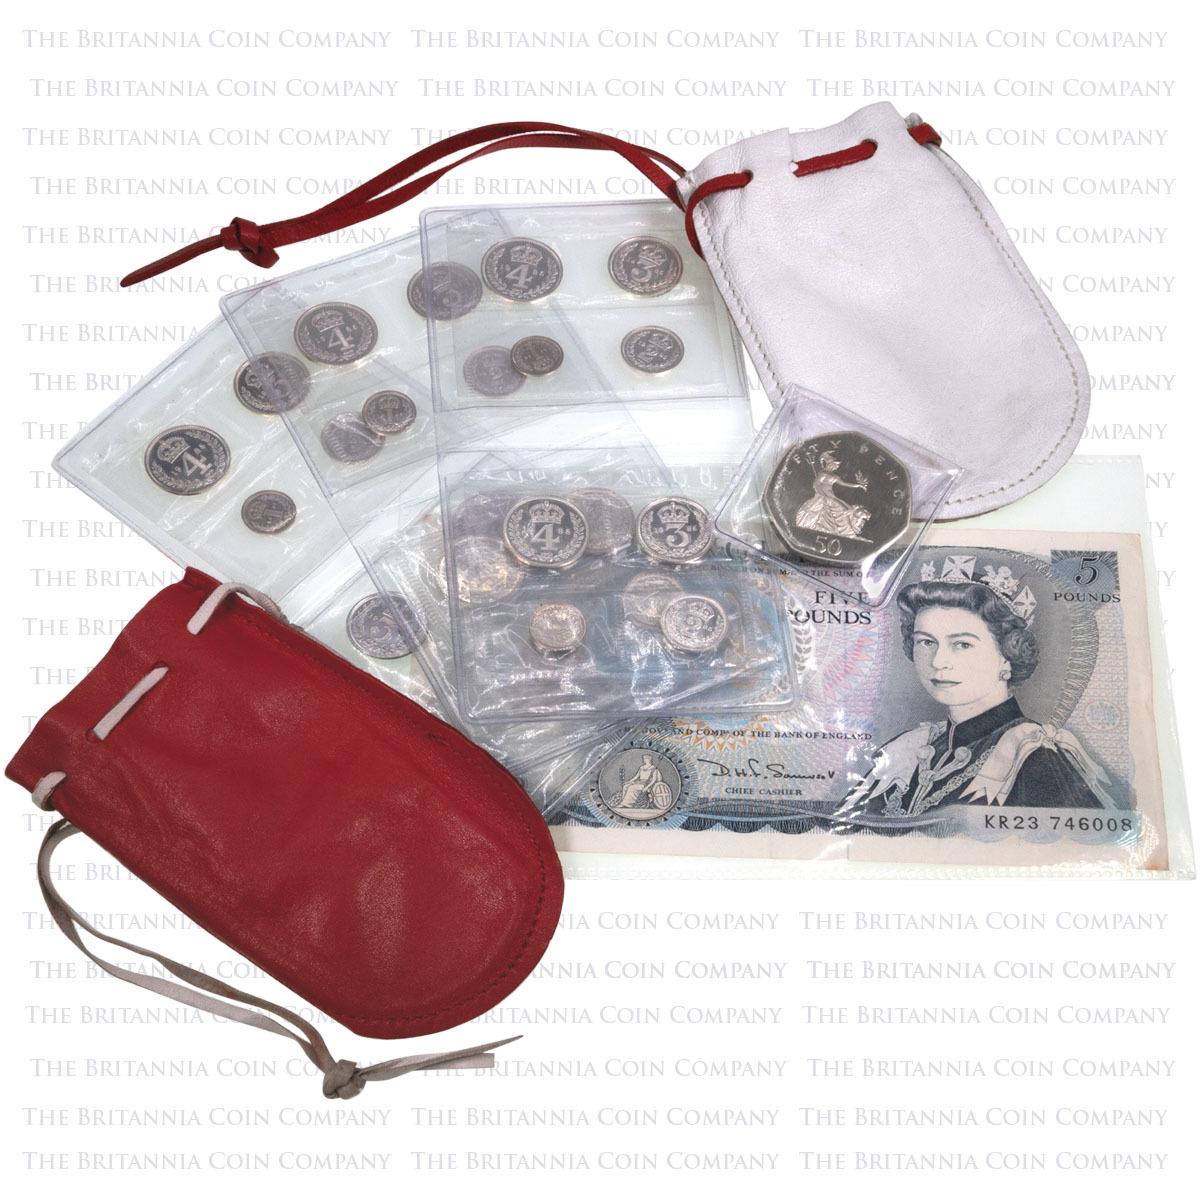 These Maundy coins, banknote and 50p were presented by Queen Elizabeth II at Ripon Cathedral in 1984, inside of the traditional pouches.